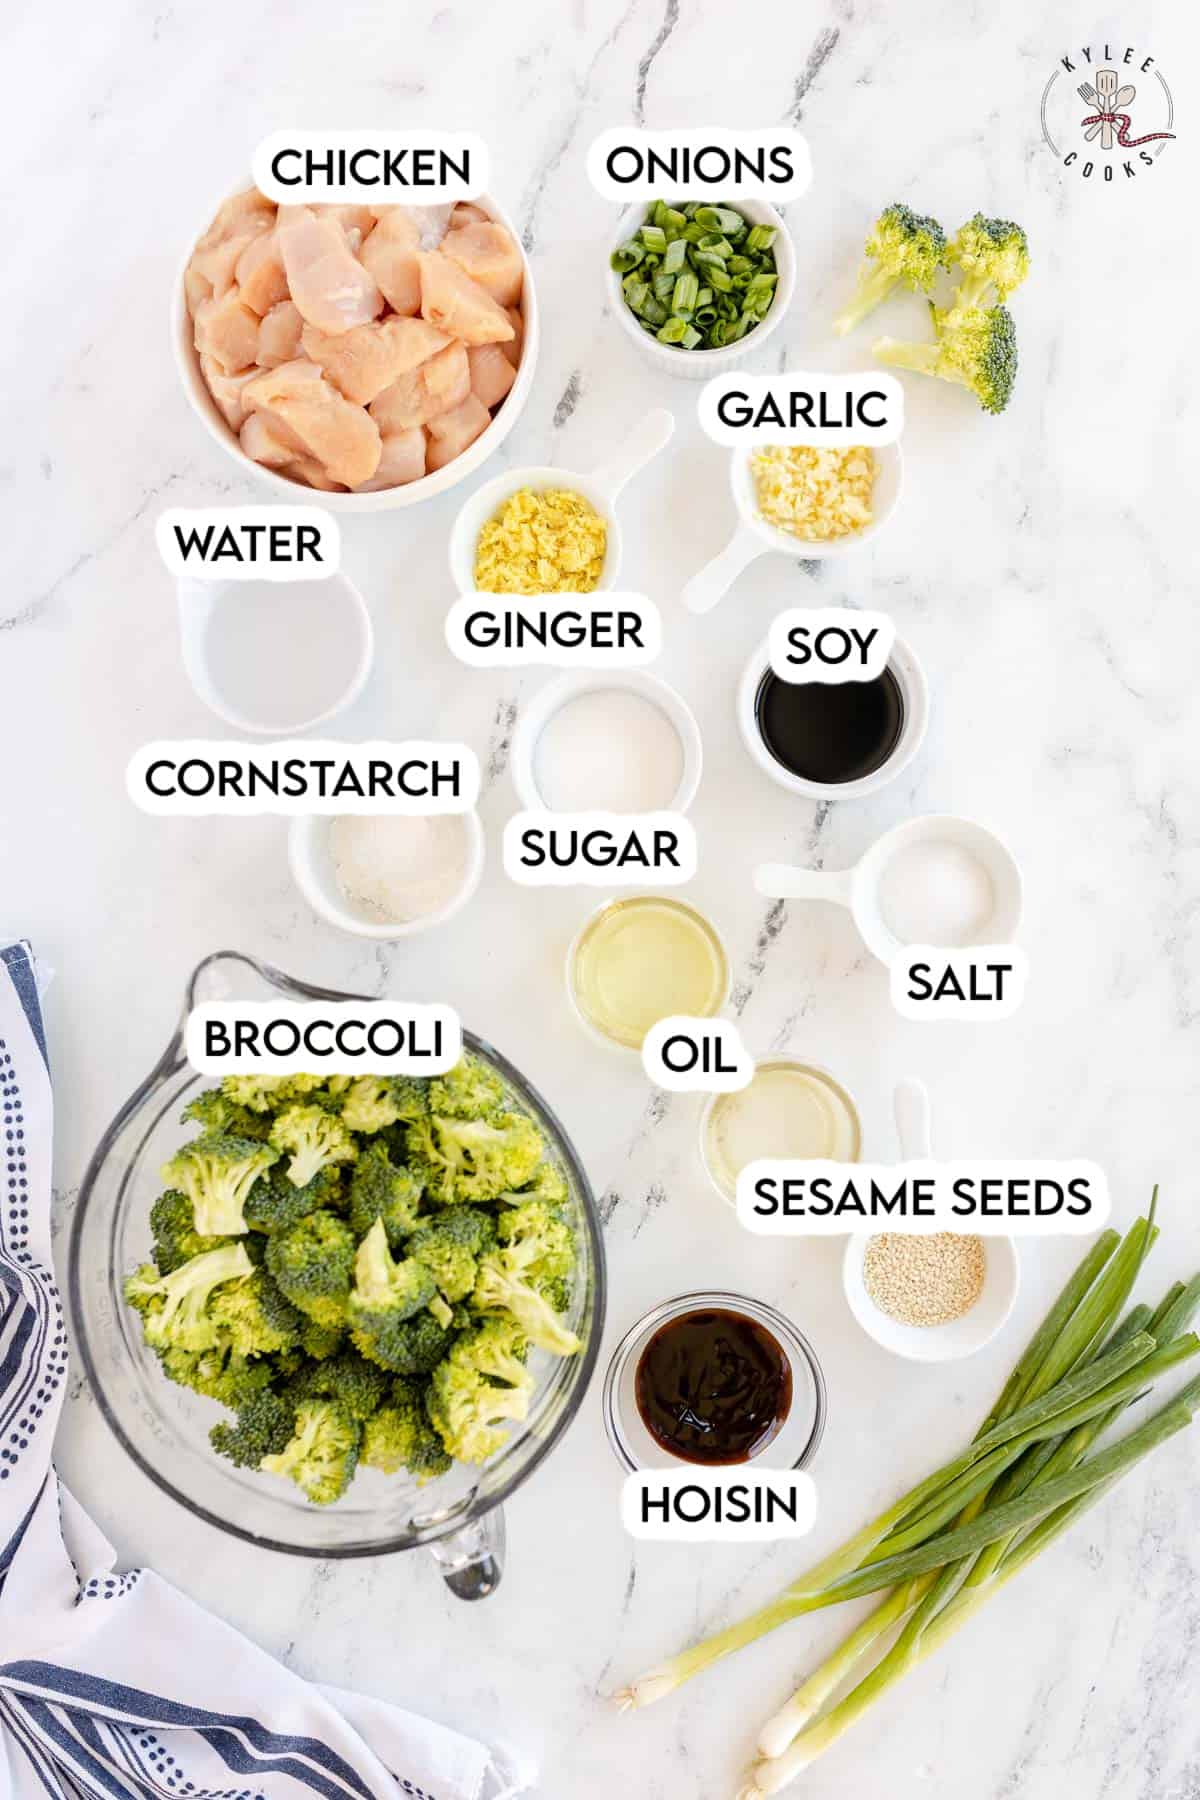 ingredients to make chicken broccoli stir fry laid out and labeled,